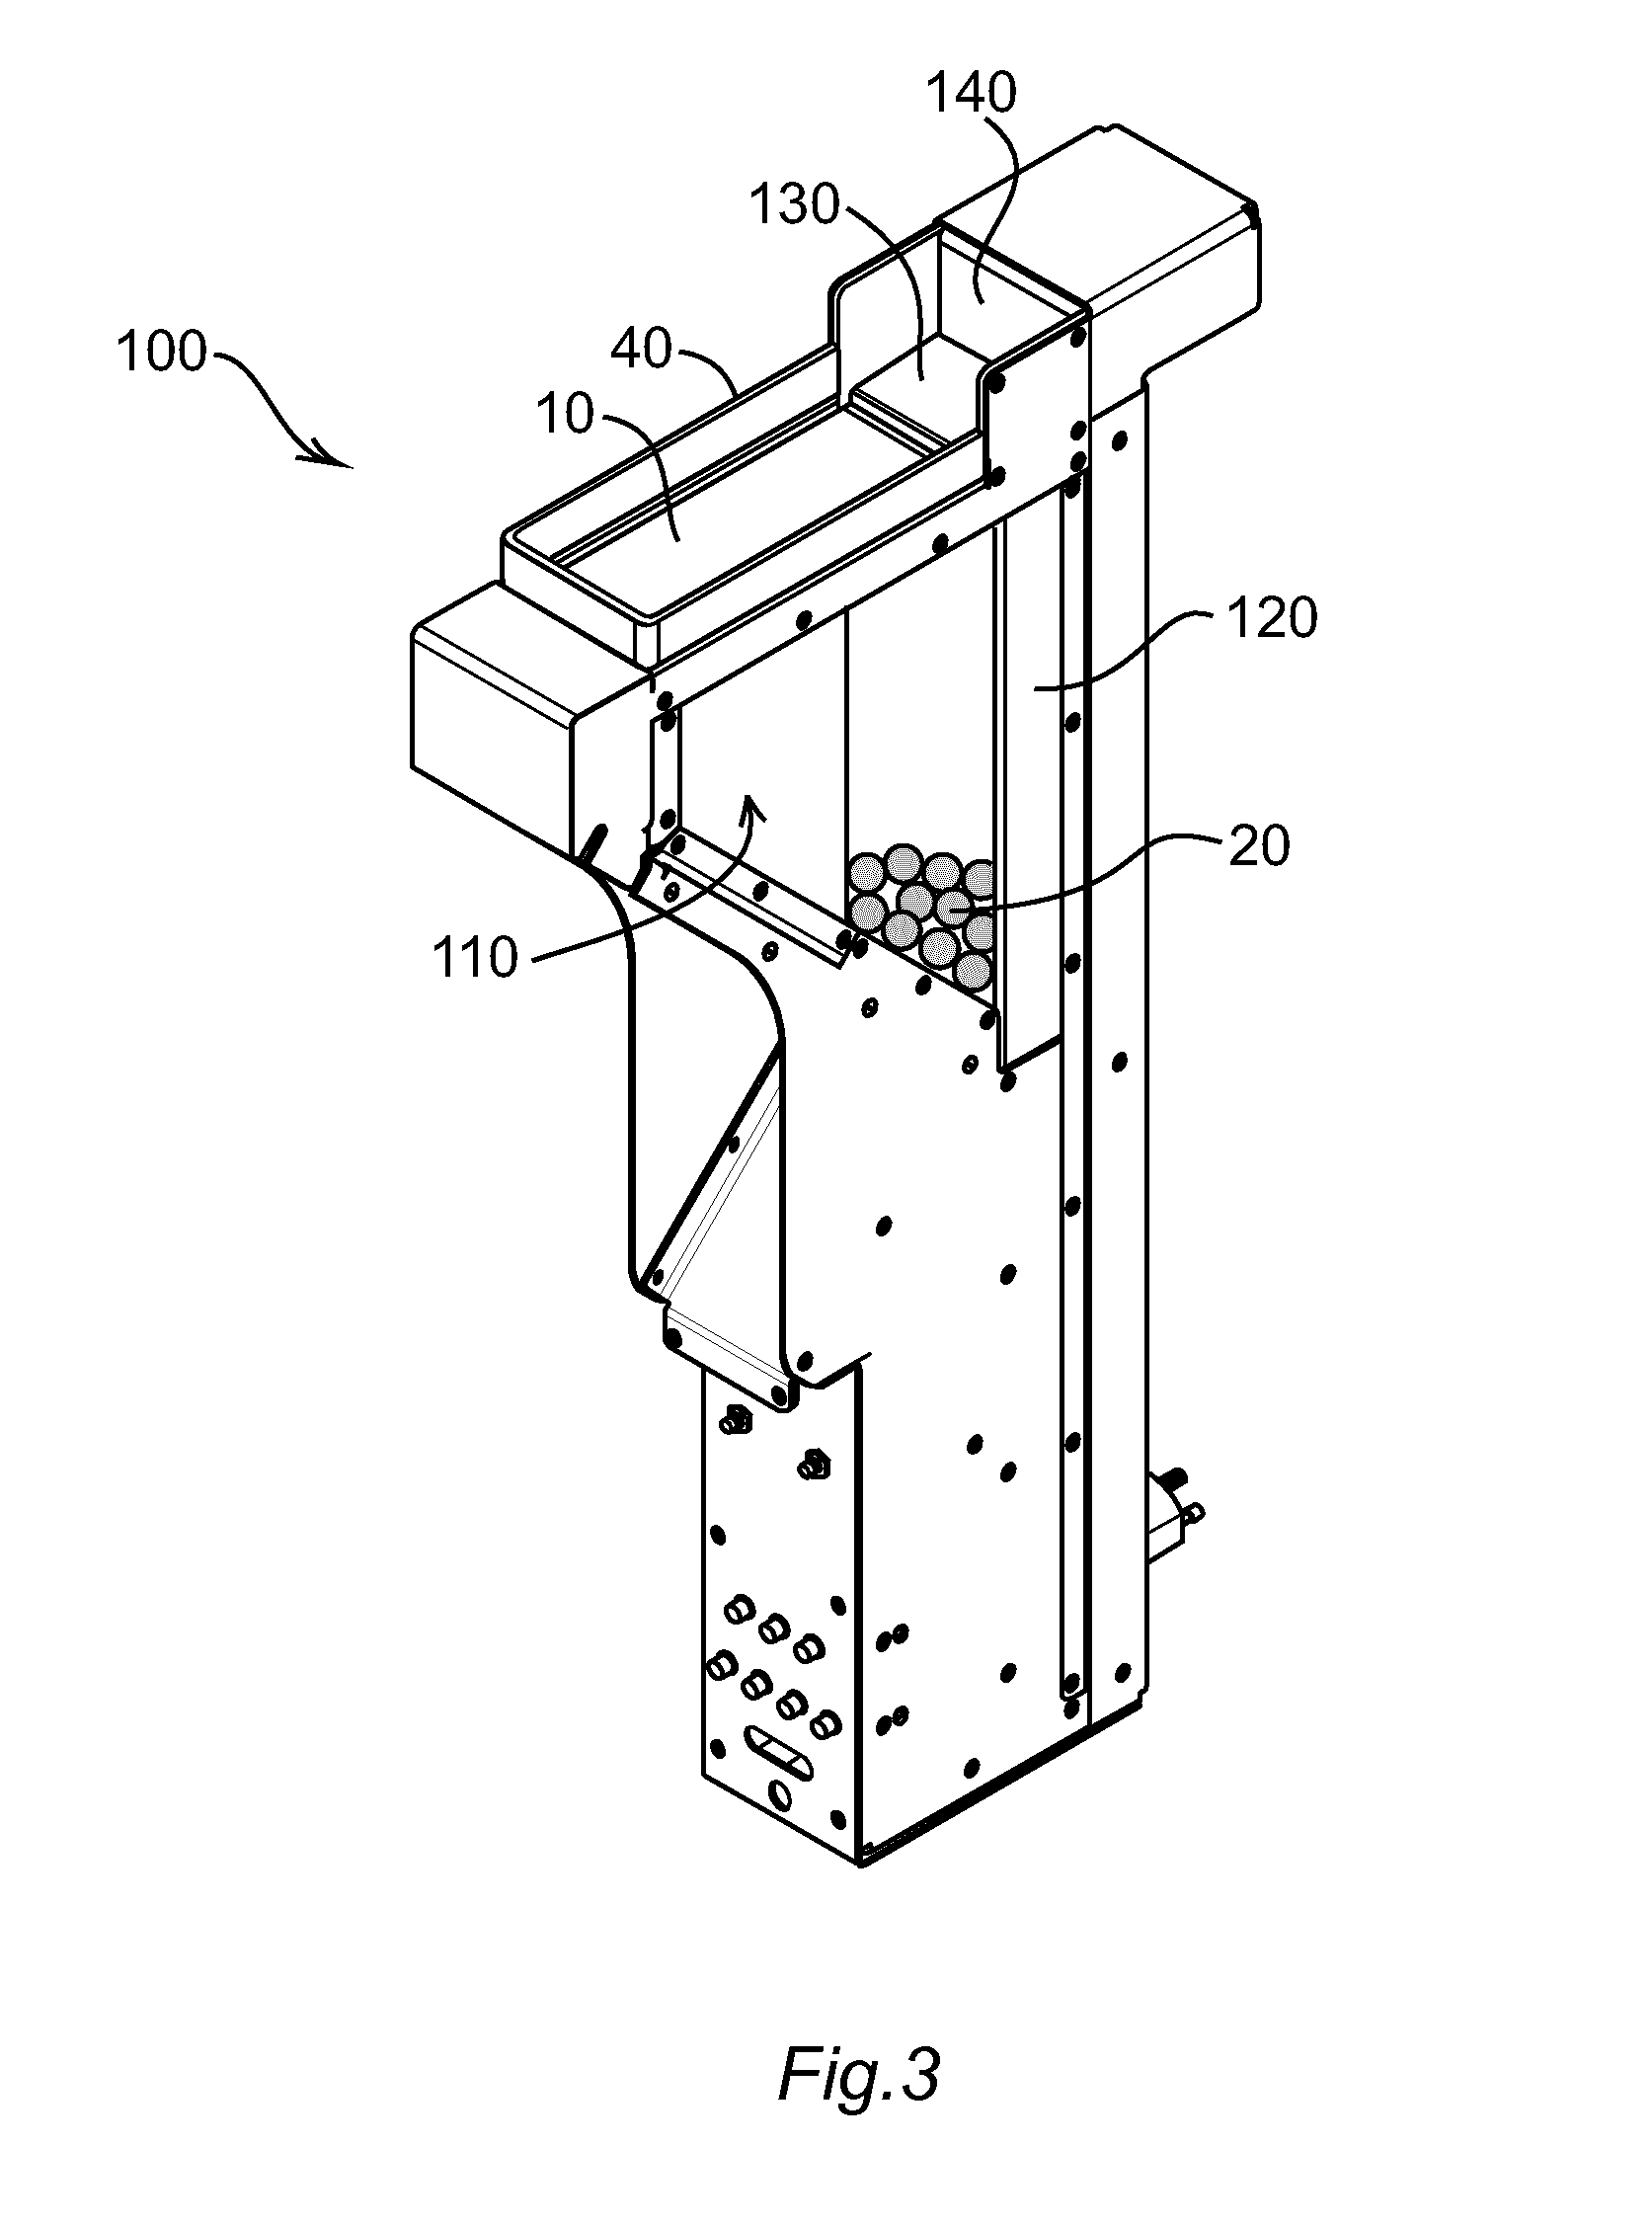 Component Feeder With Flexible Retaining Walls